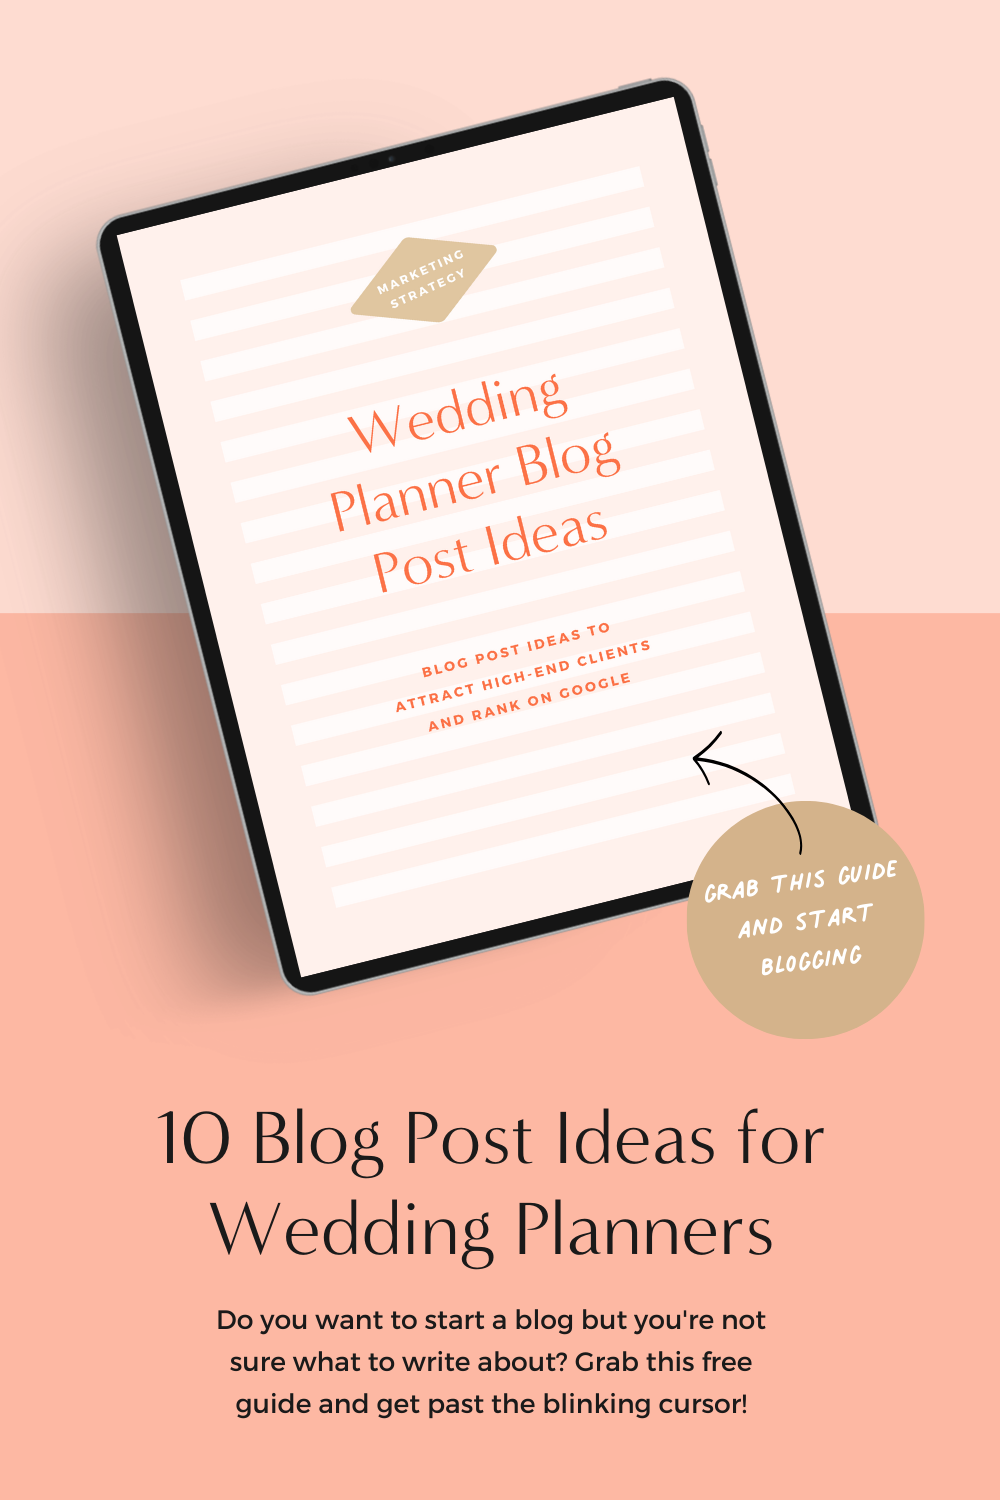 Skyrocket your wedding planning blog's Google ranking with our 10 free topic ideas. Specifically tailored for wedding planners, these topics are bound to engage your ideal clients. Download your guide to masterful content creation now, and let your blog become a beacon for all things wedding planning!